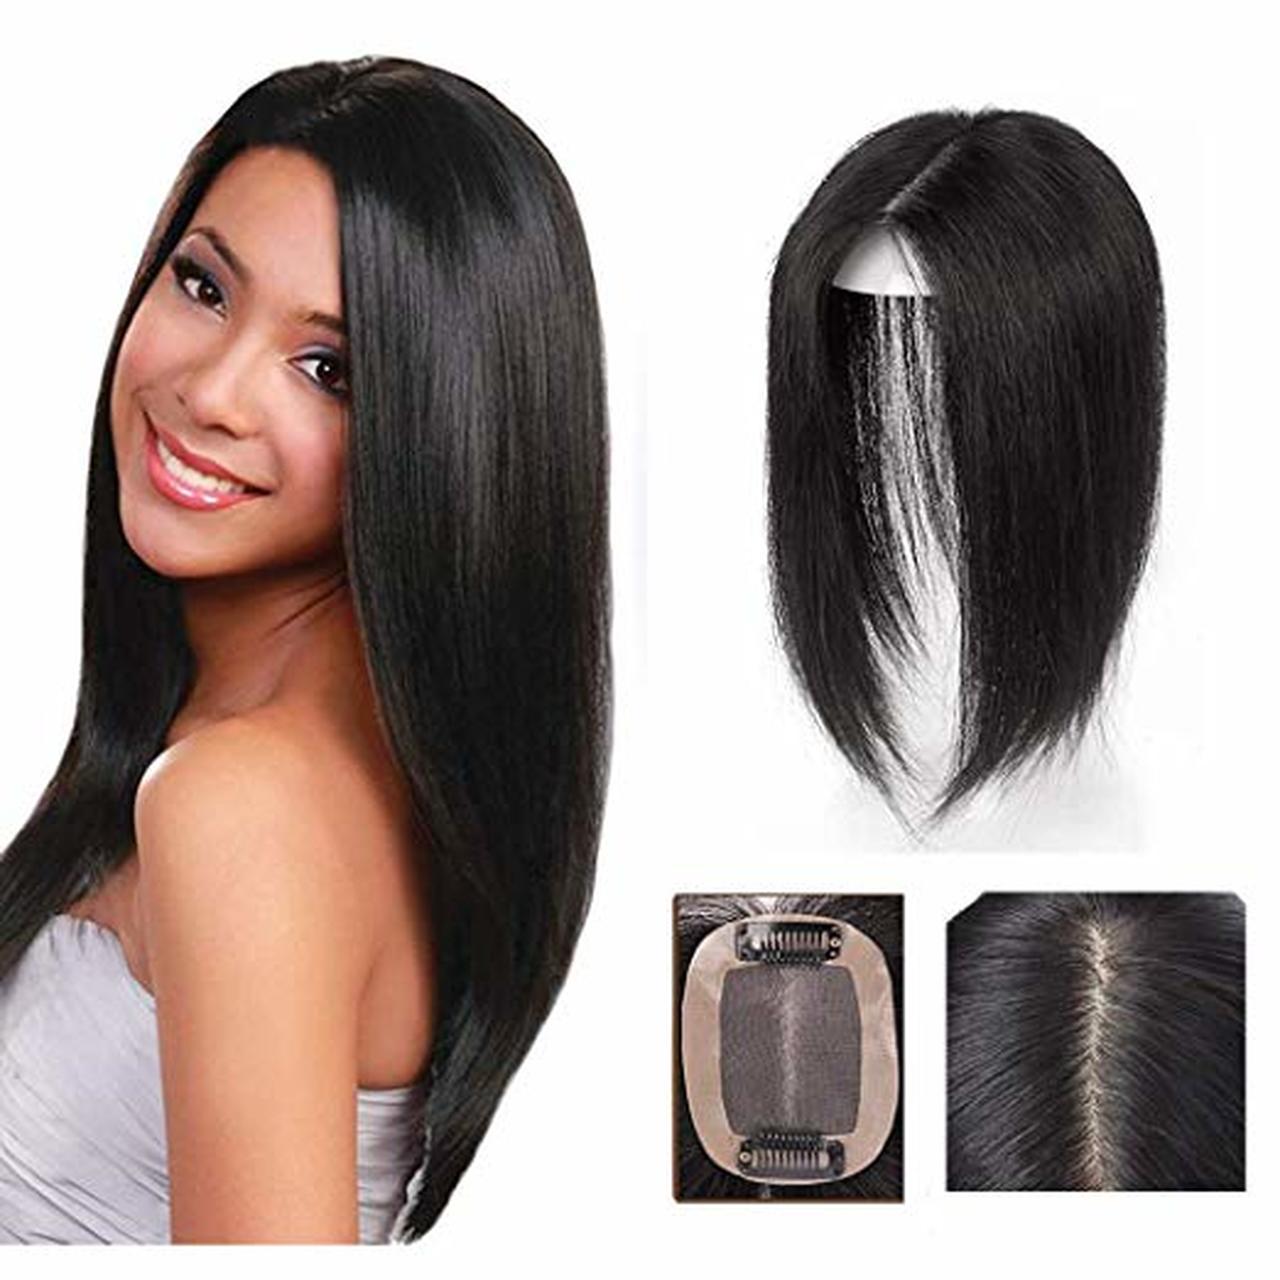 Human Hair Topper Straight Hairpieces Clip In Top Crown Hair Extension For Cover White Loss Hair Free Part 0